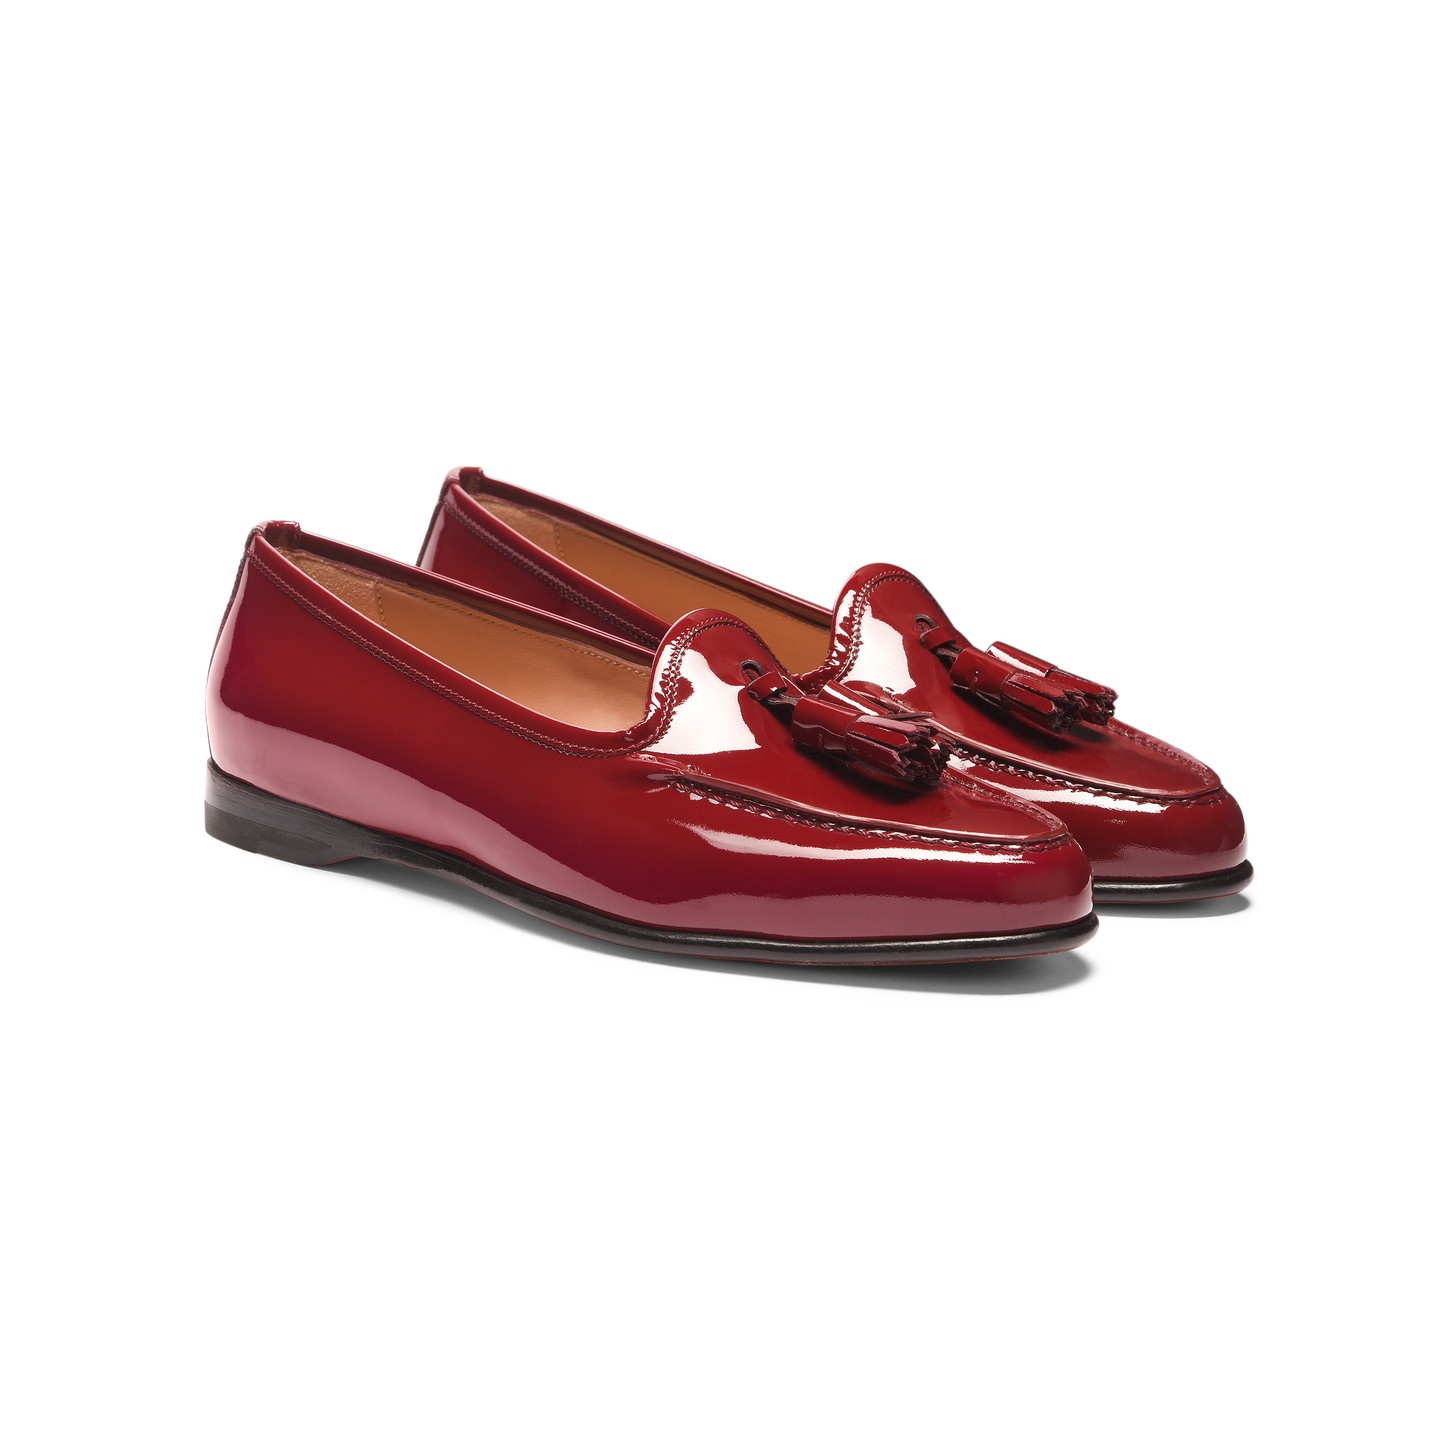 Women's red patent leather Andrea tassel loafer - 2